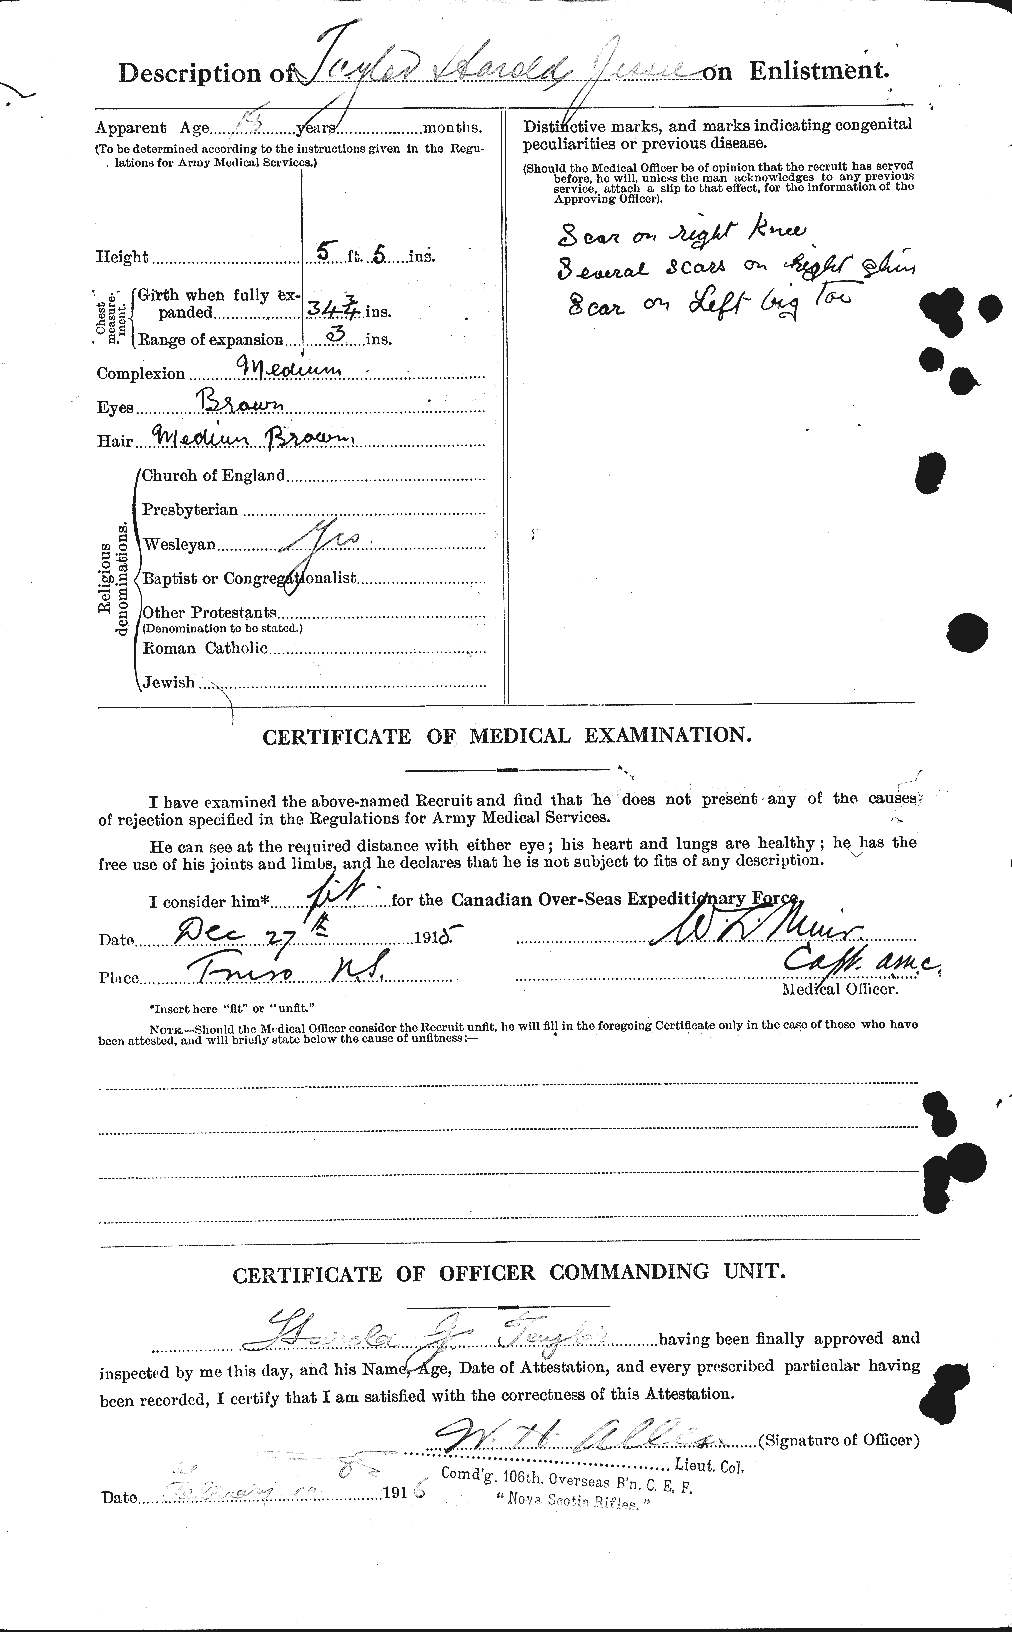 Personnel Records of the First World War - CEF 626425b